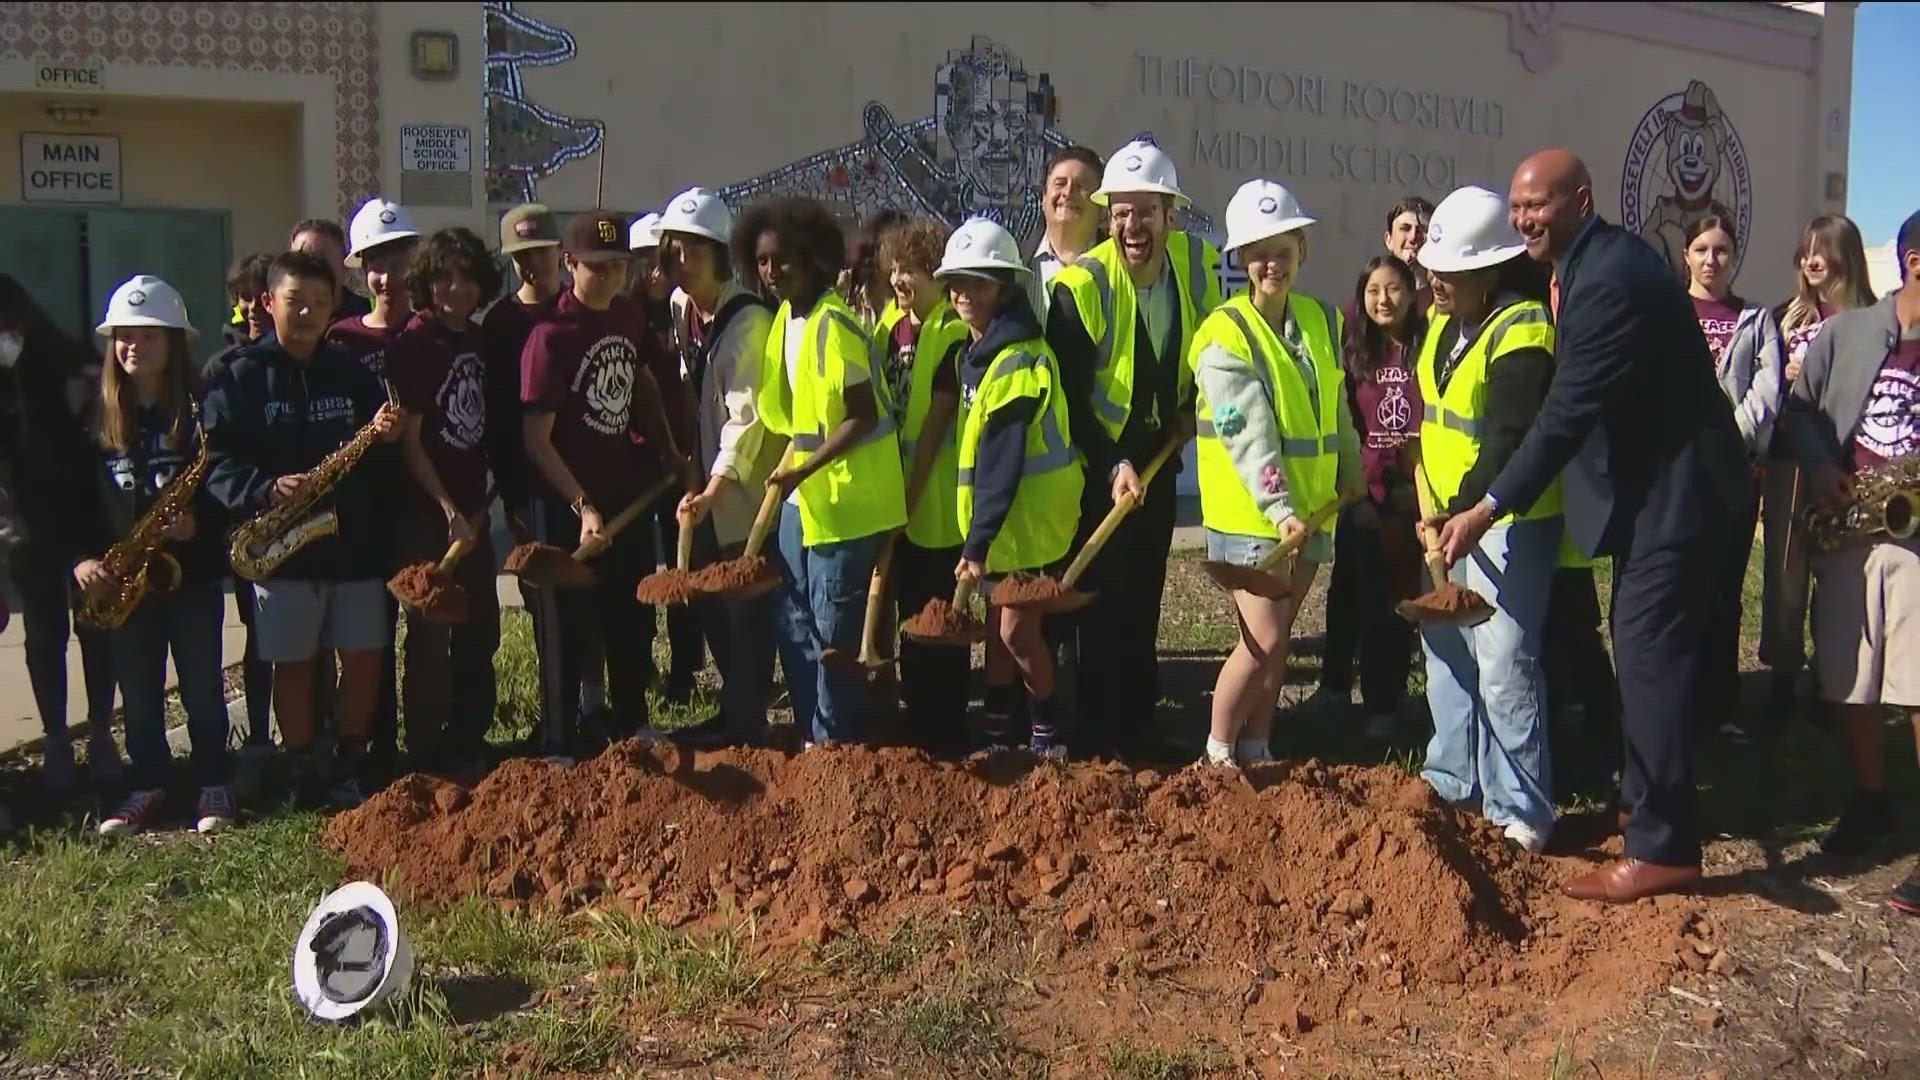 Roosevelt was one of the first junior high schools in San Diego. Students celebrated construction on major renovations with a groundbreaking.